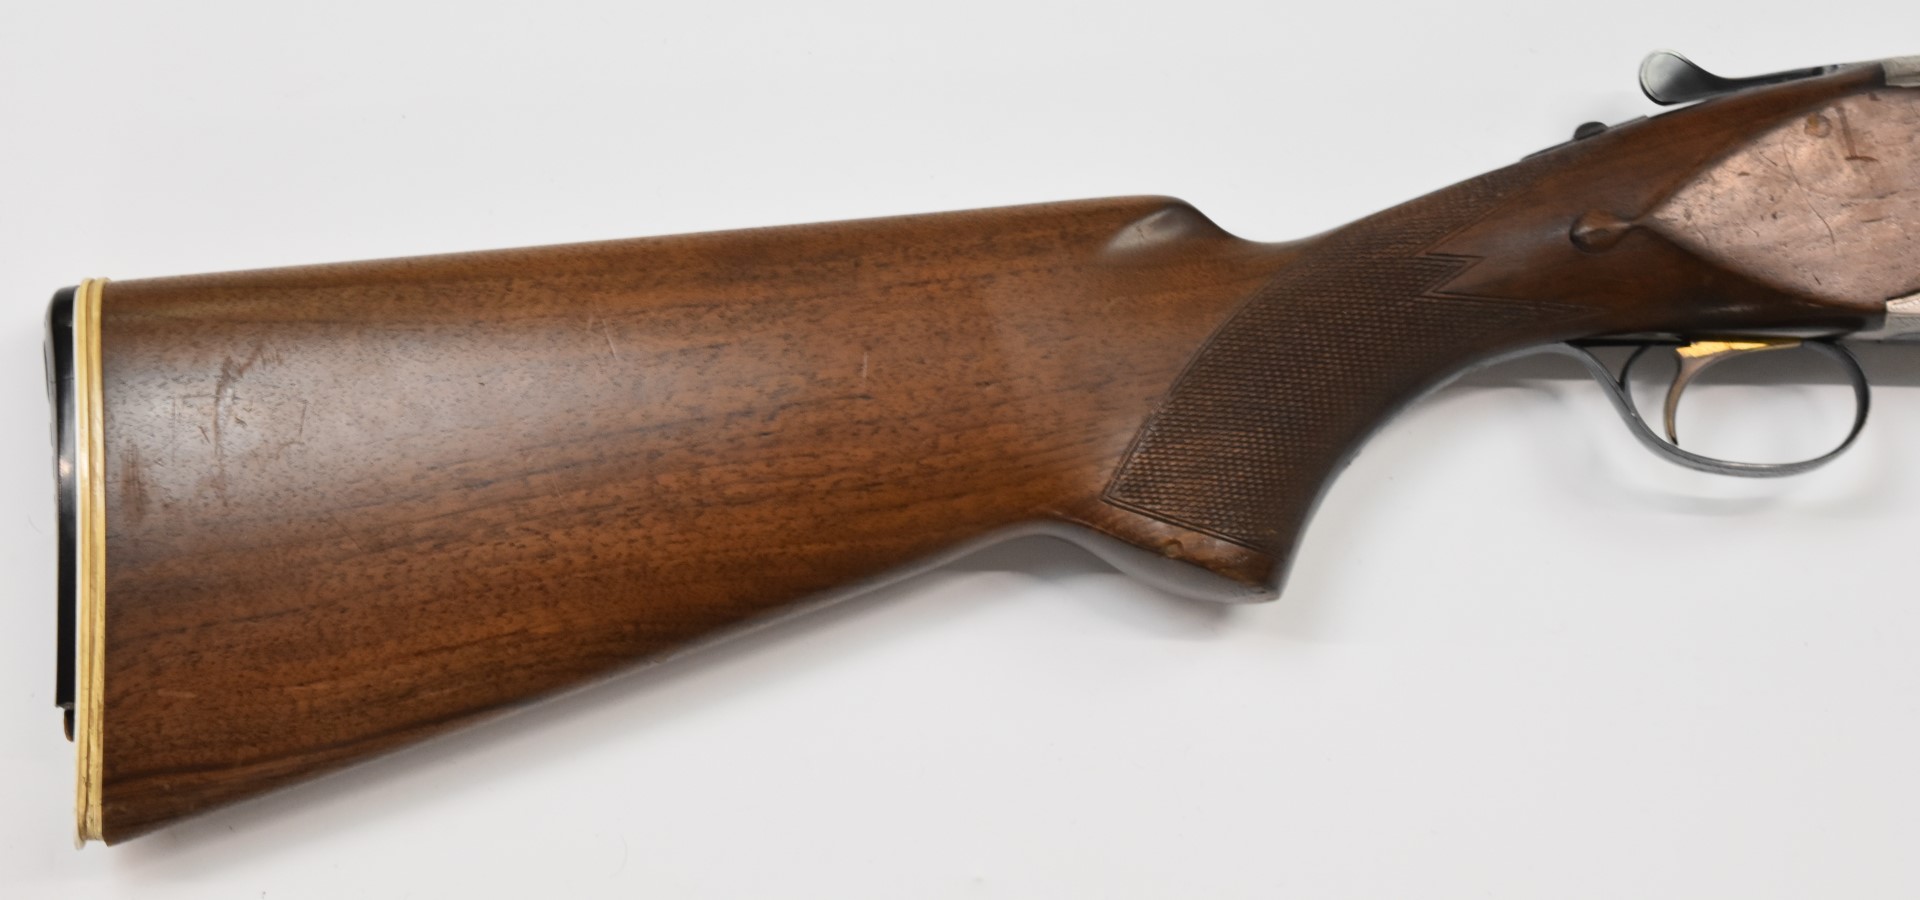 Miroku 12 bore over and under ejector shotgun with engraved locks, underside, trigger guard, top - Image 3 of 11